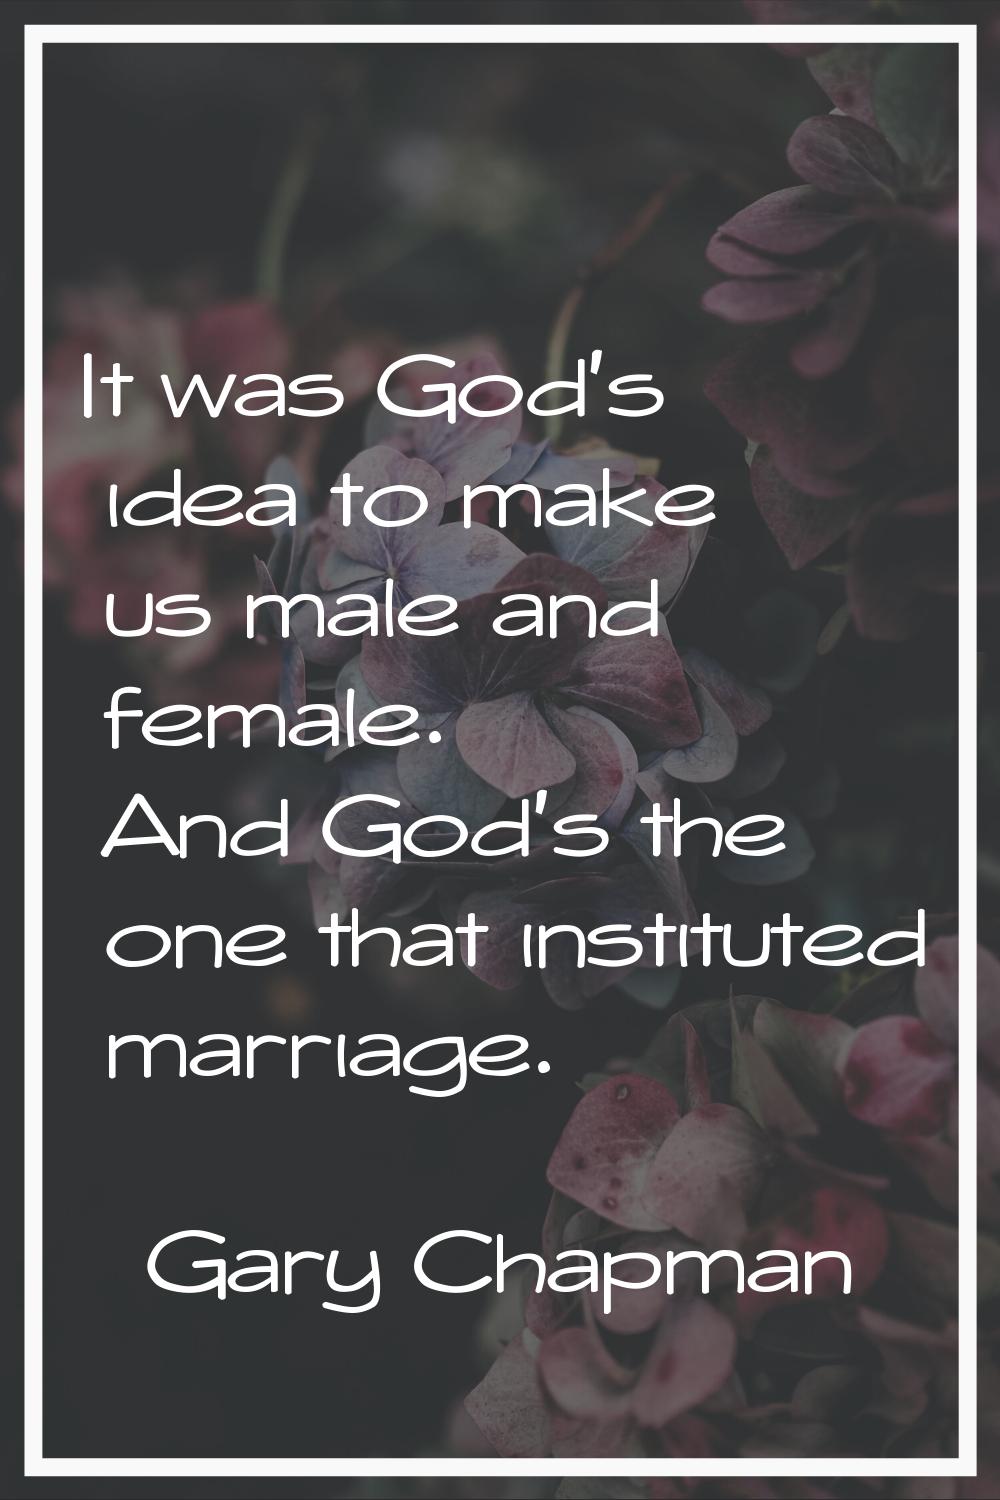 It was God's idea to make us male and female. And God's the one that instituted marriage.